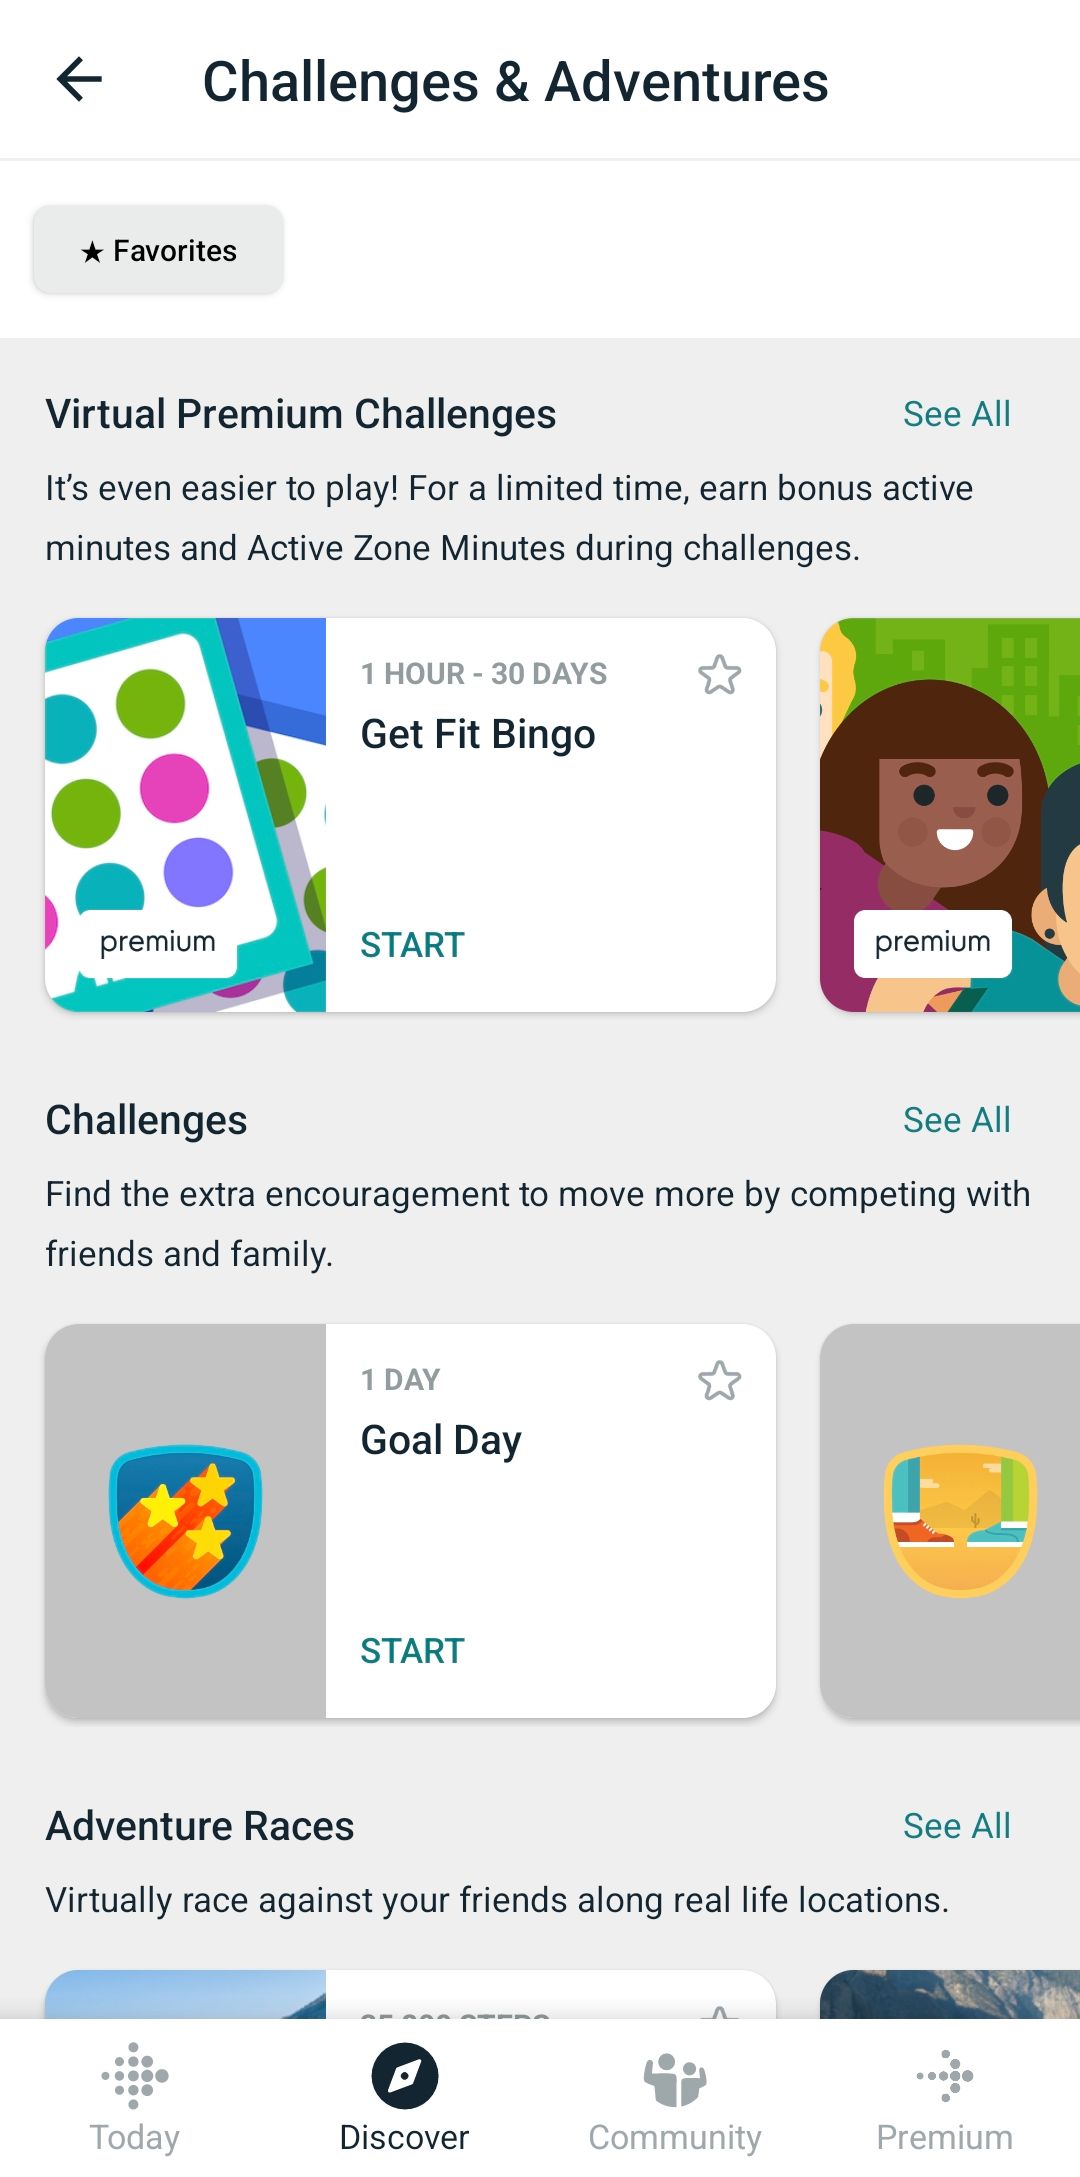 Fitbit Challenges and Adventures